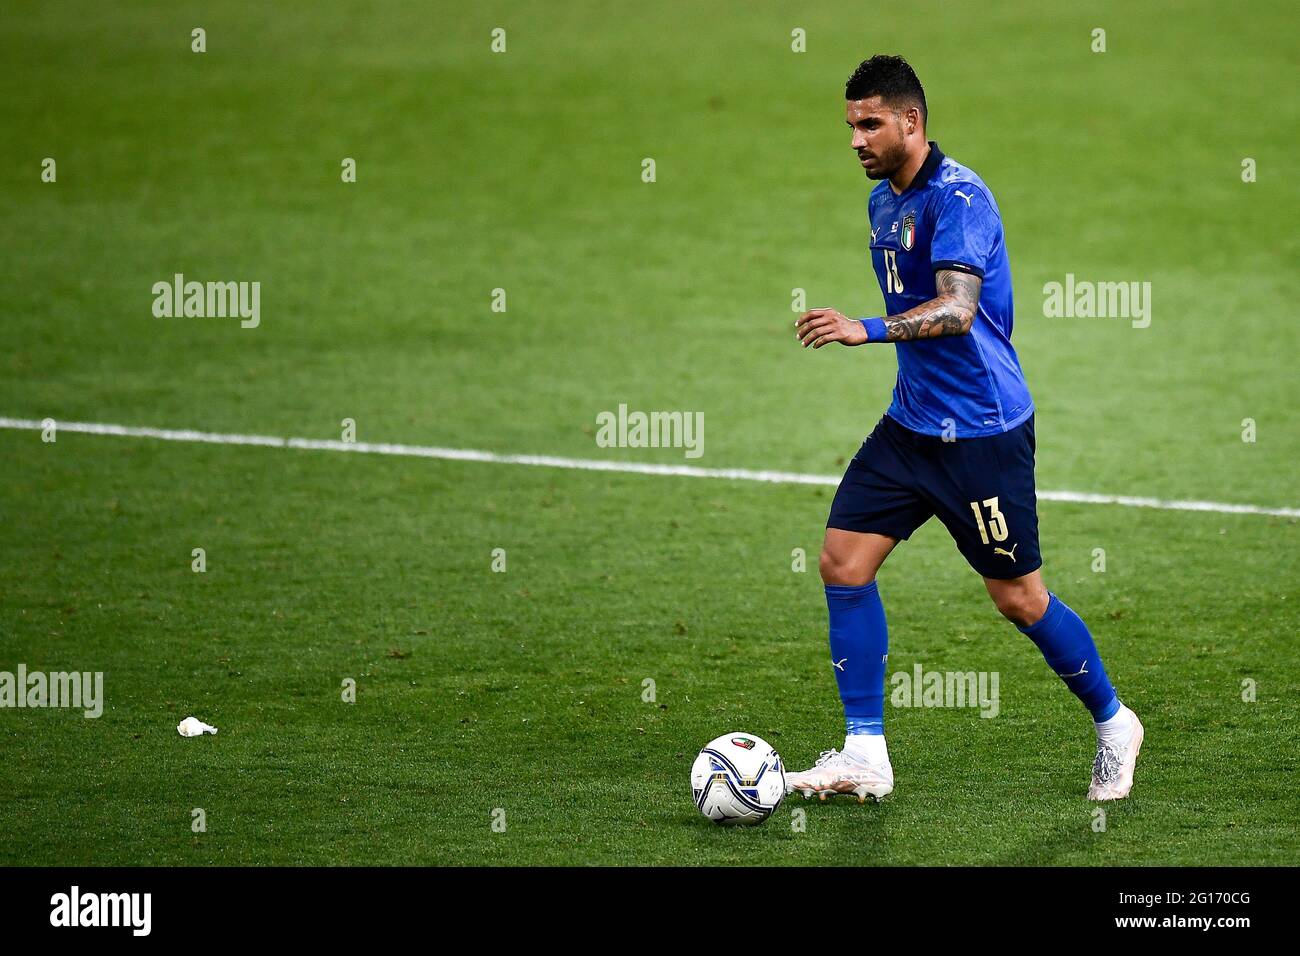 Bologna, Italy. 04 June 2021. Emerson Palmieri dos Santos of Italy in action during the international friendly match between Italy and Czech Republic. Italy won 4-0 over Czech Republic. Credit: Nicolò Campo/Alamy Live News Stock Photo